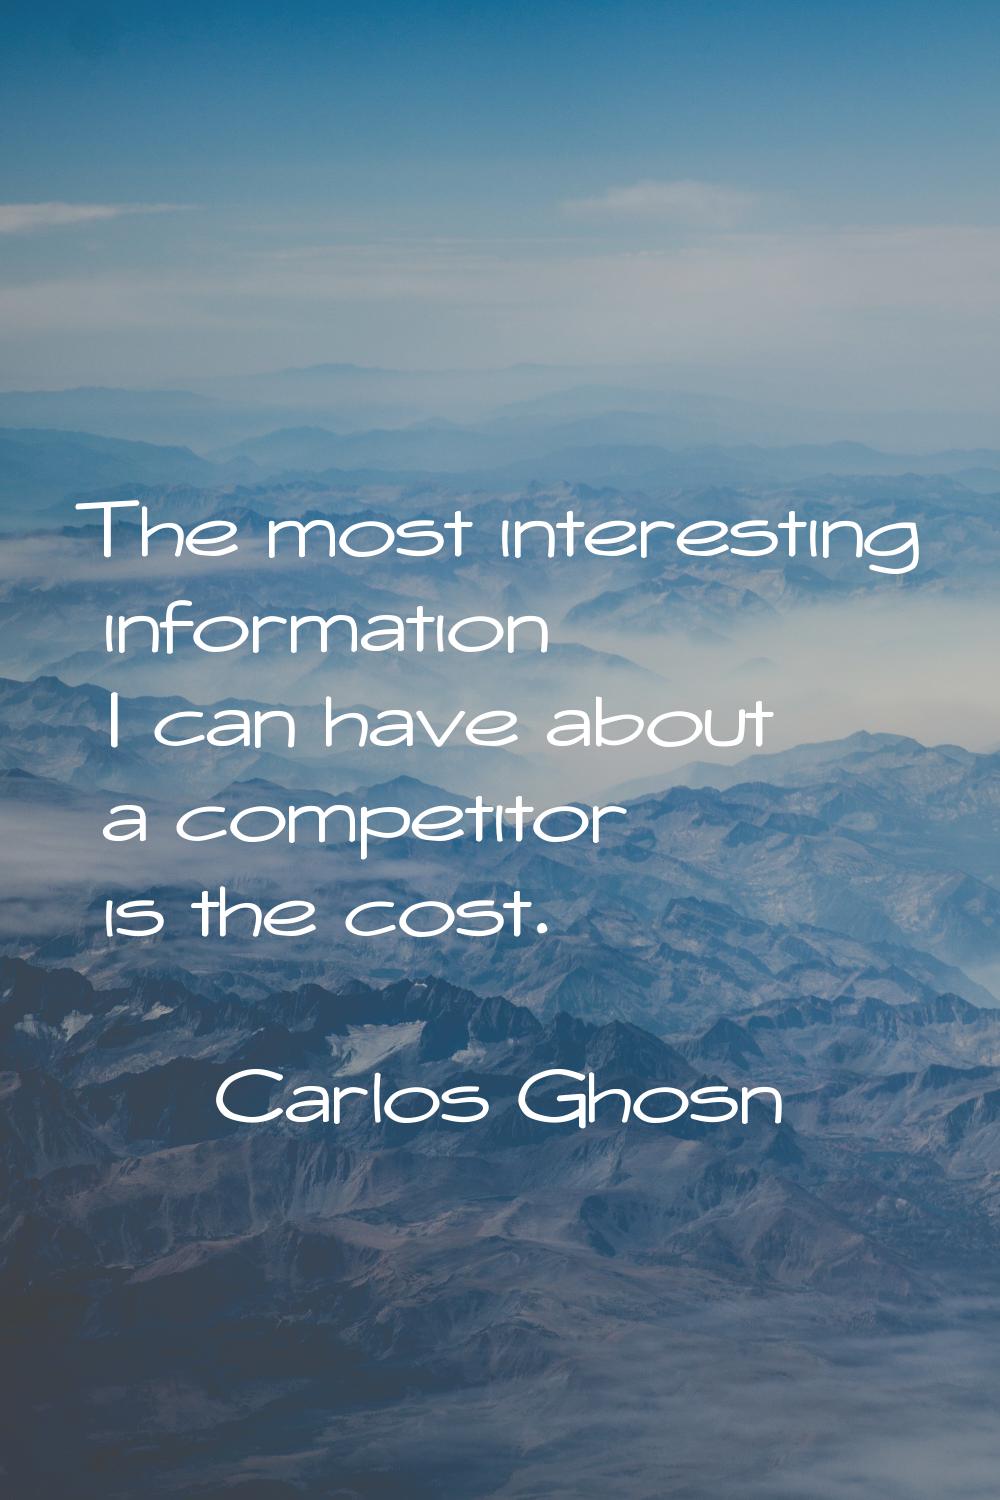 The most interesting information I can have about a competitor is the cost.